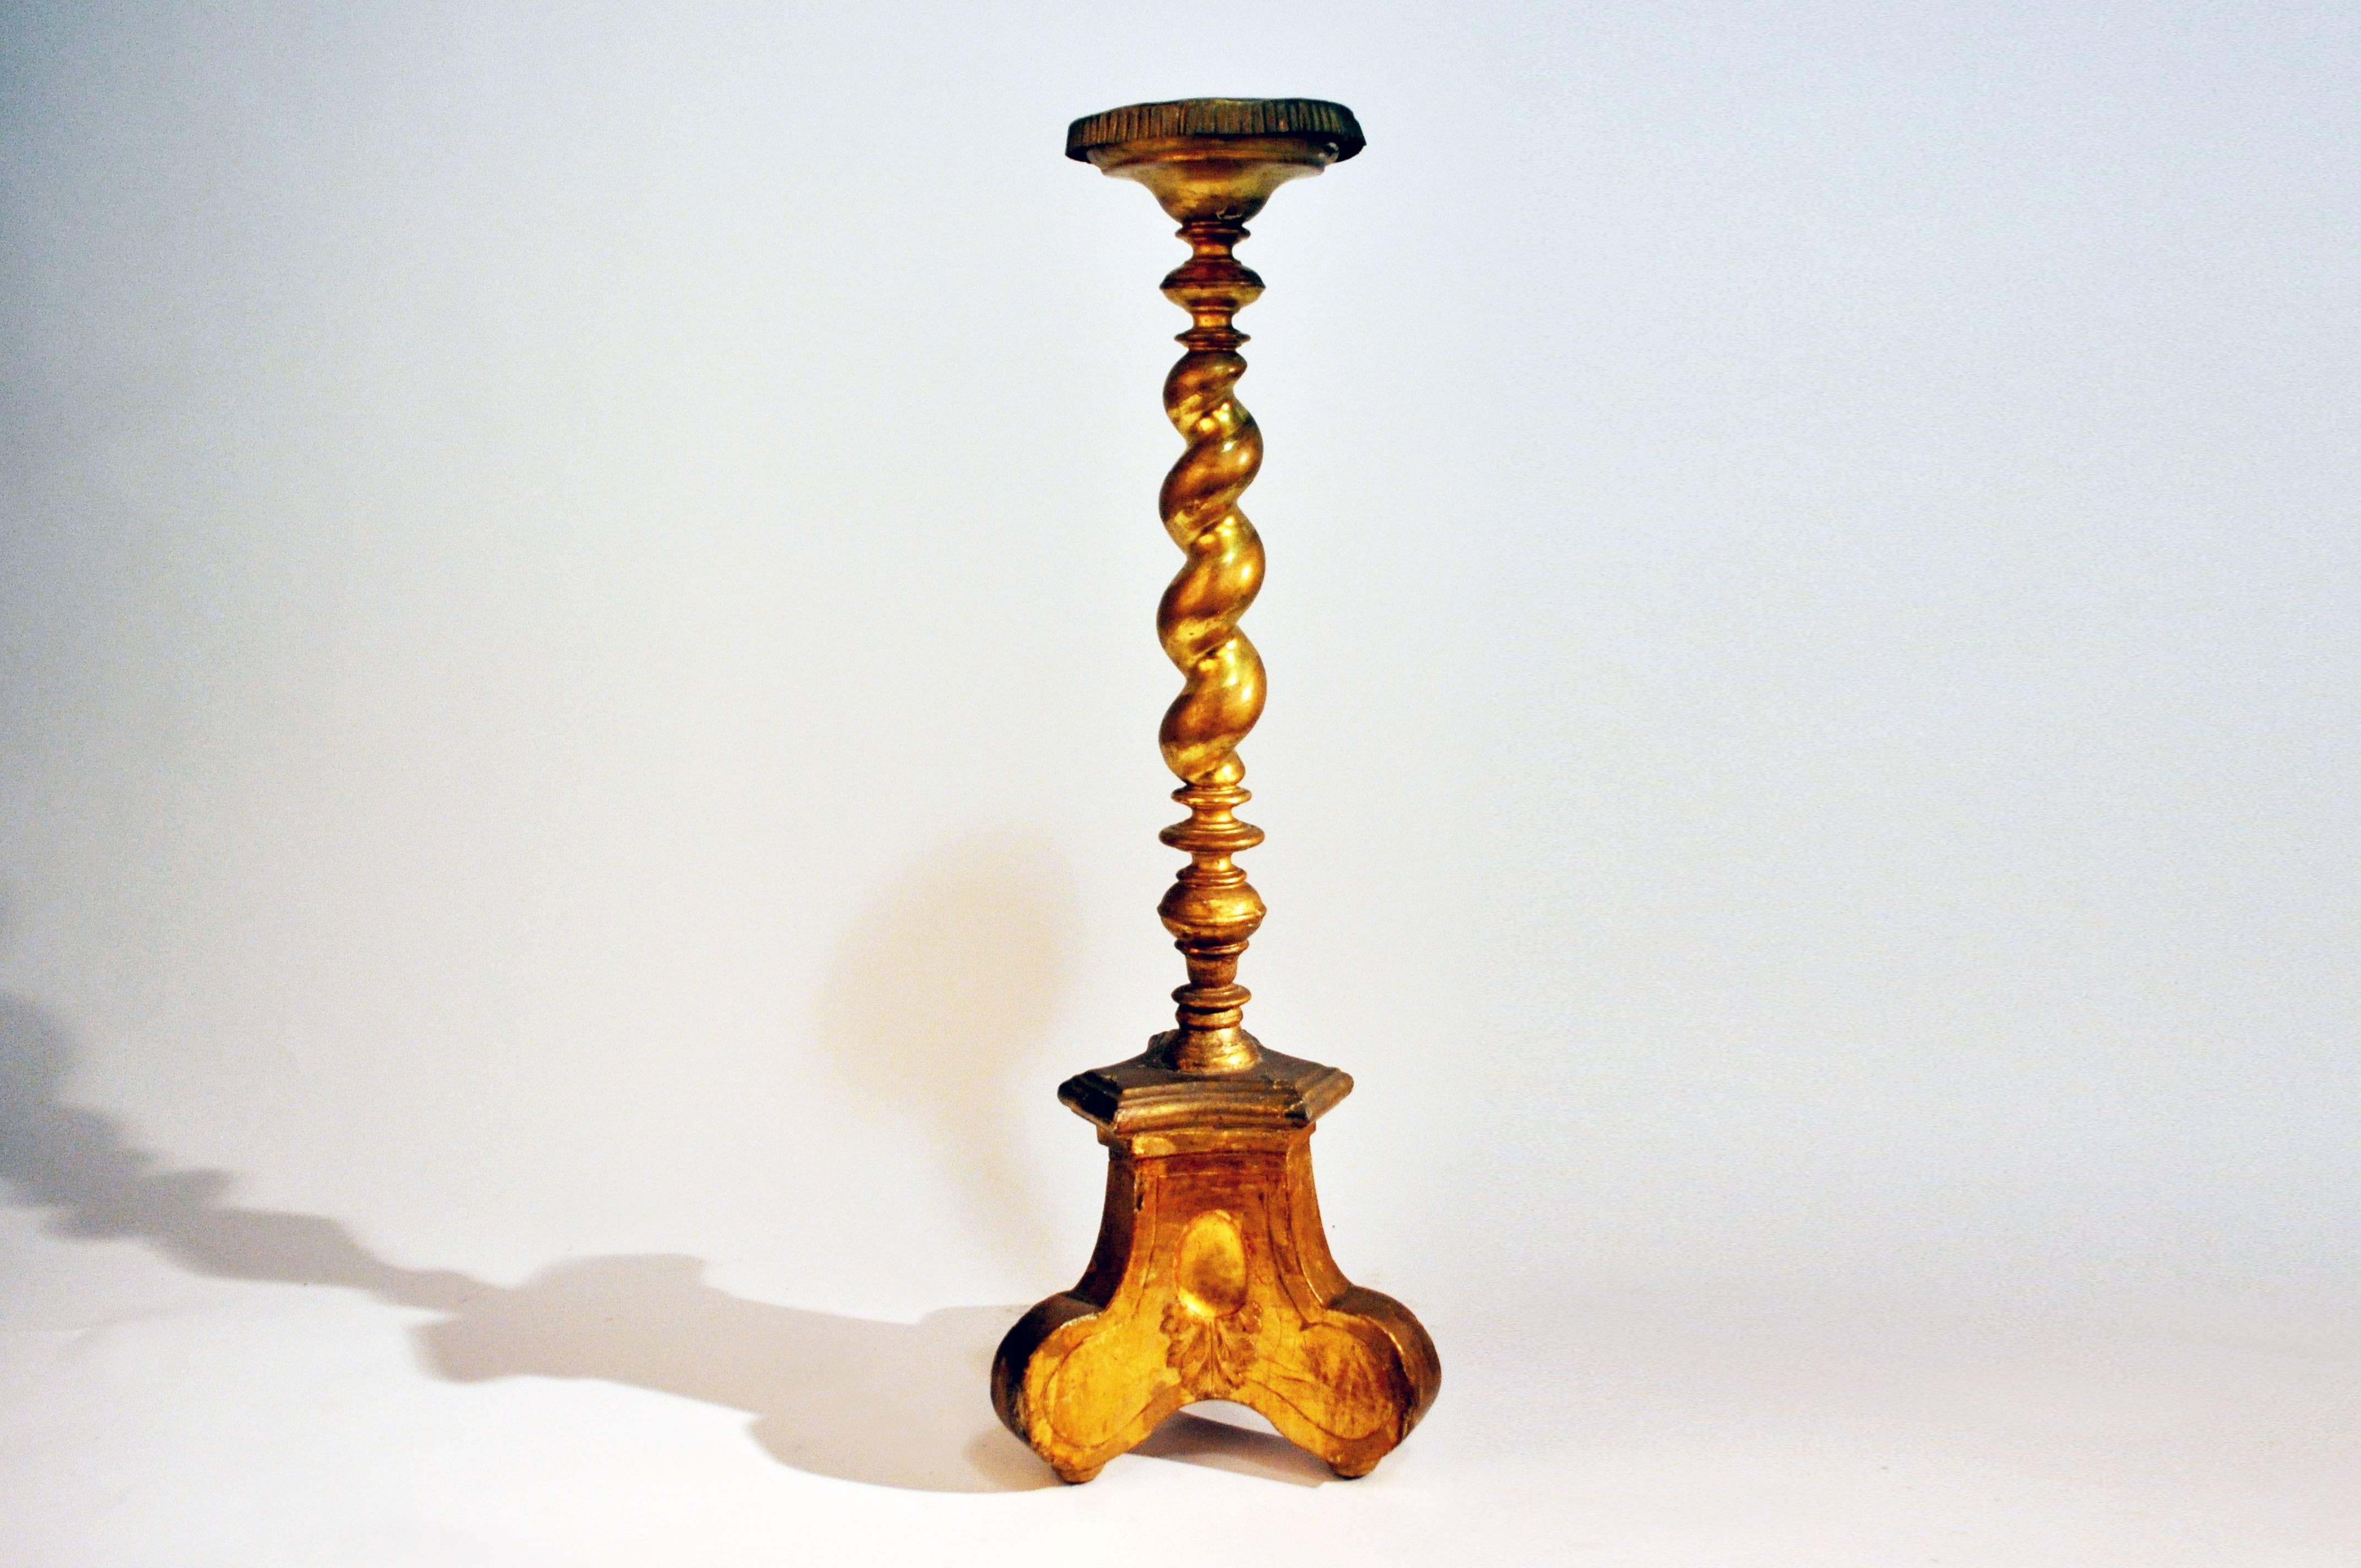 This tall candle stand features a barley twist and ring turned wood pillar, which is raised on a decorative tripod base.